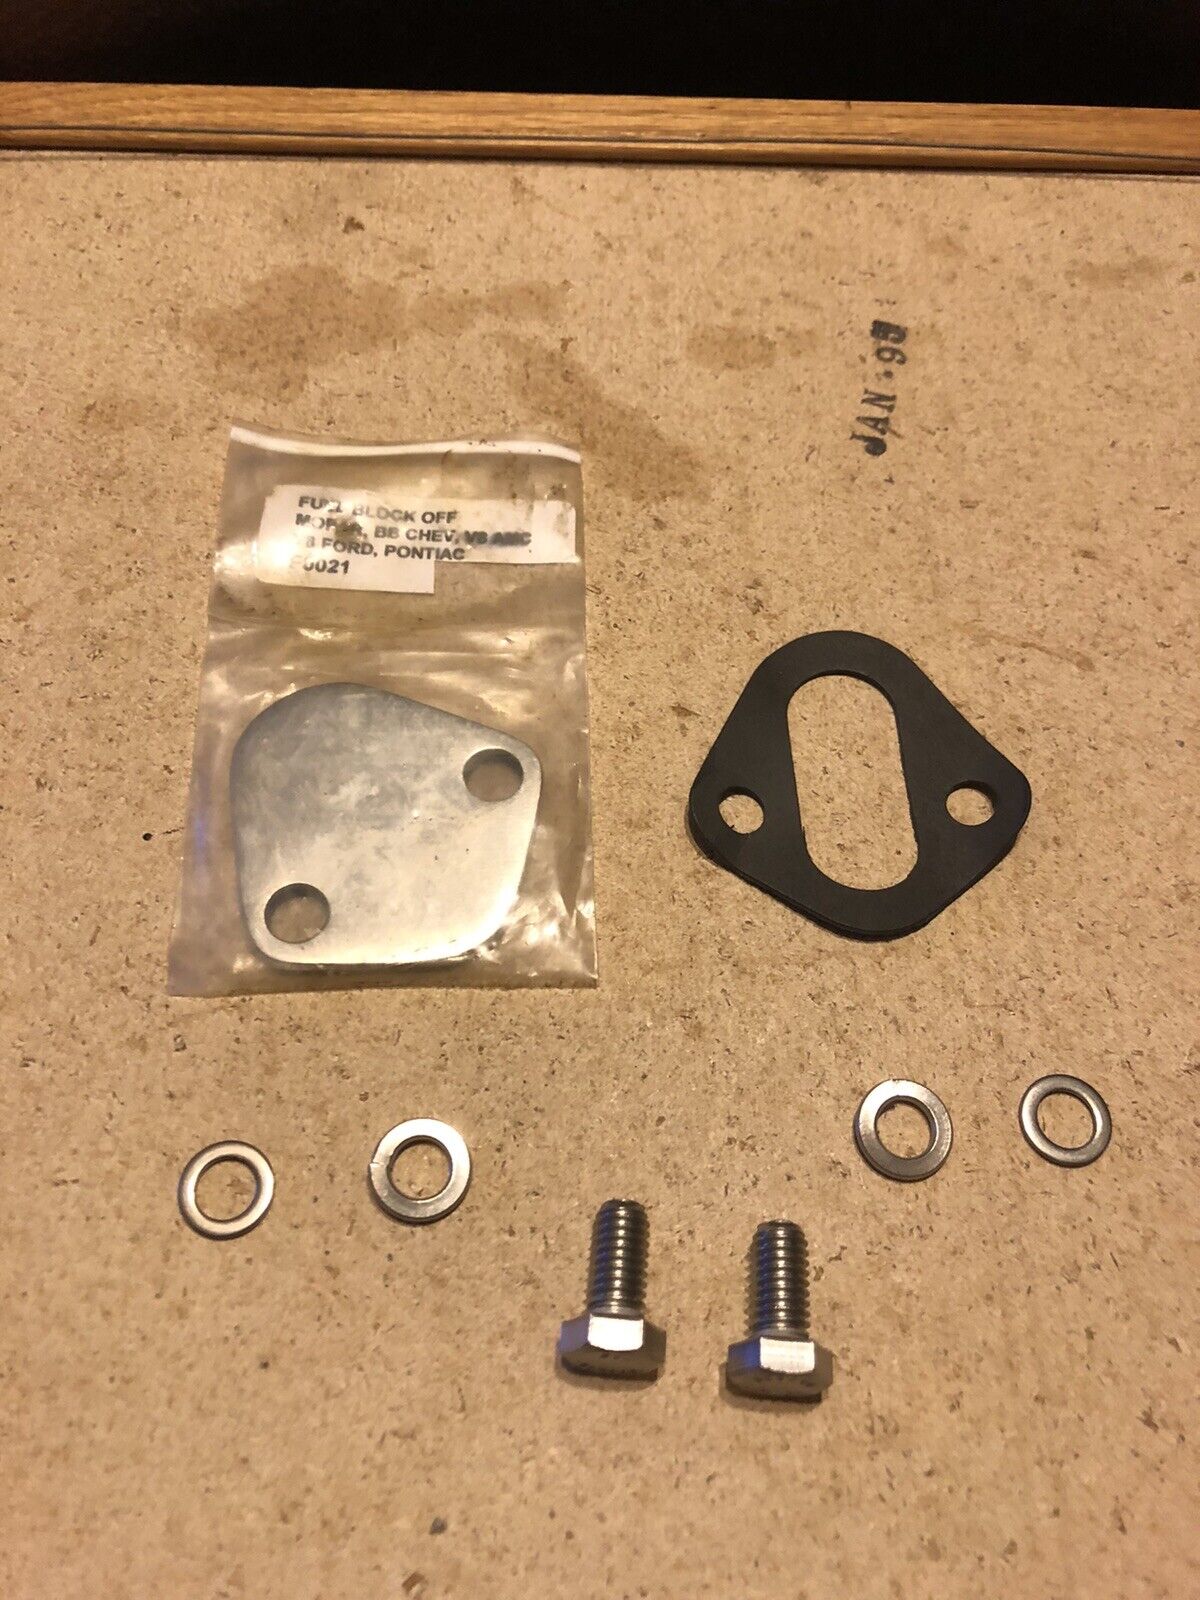 AMC CHEVY,FORD.POMTOAC fuel pump block off PO;LSHED STAINLESS w/gasket & bolts